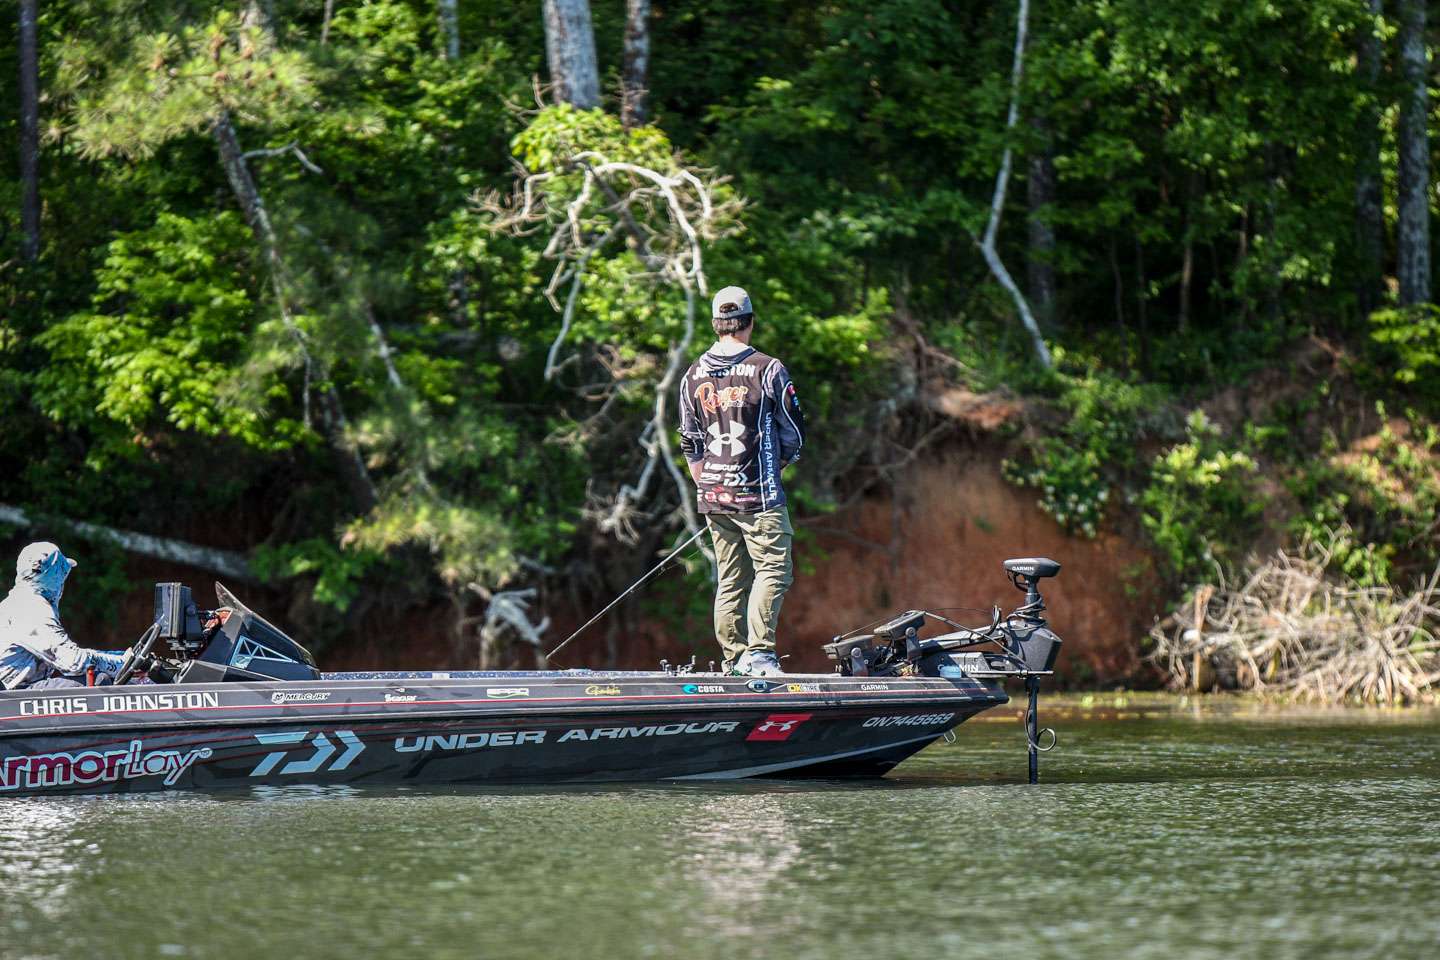 Follow along with Chris Johnston and Bryan New as they tackle the afternoon of the first day of the 2021 Berkley Bassmaster Elite at Lake Guntersville!